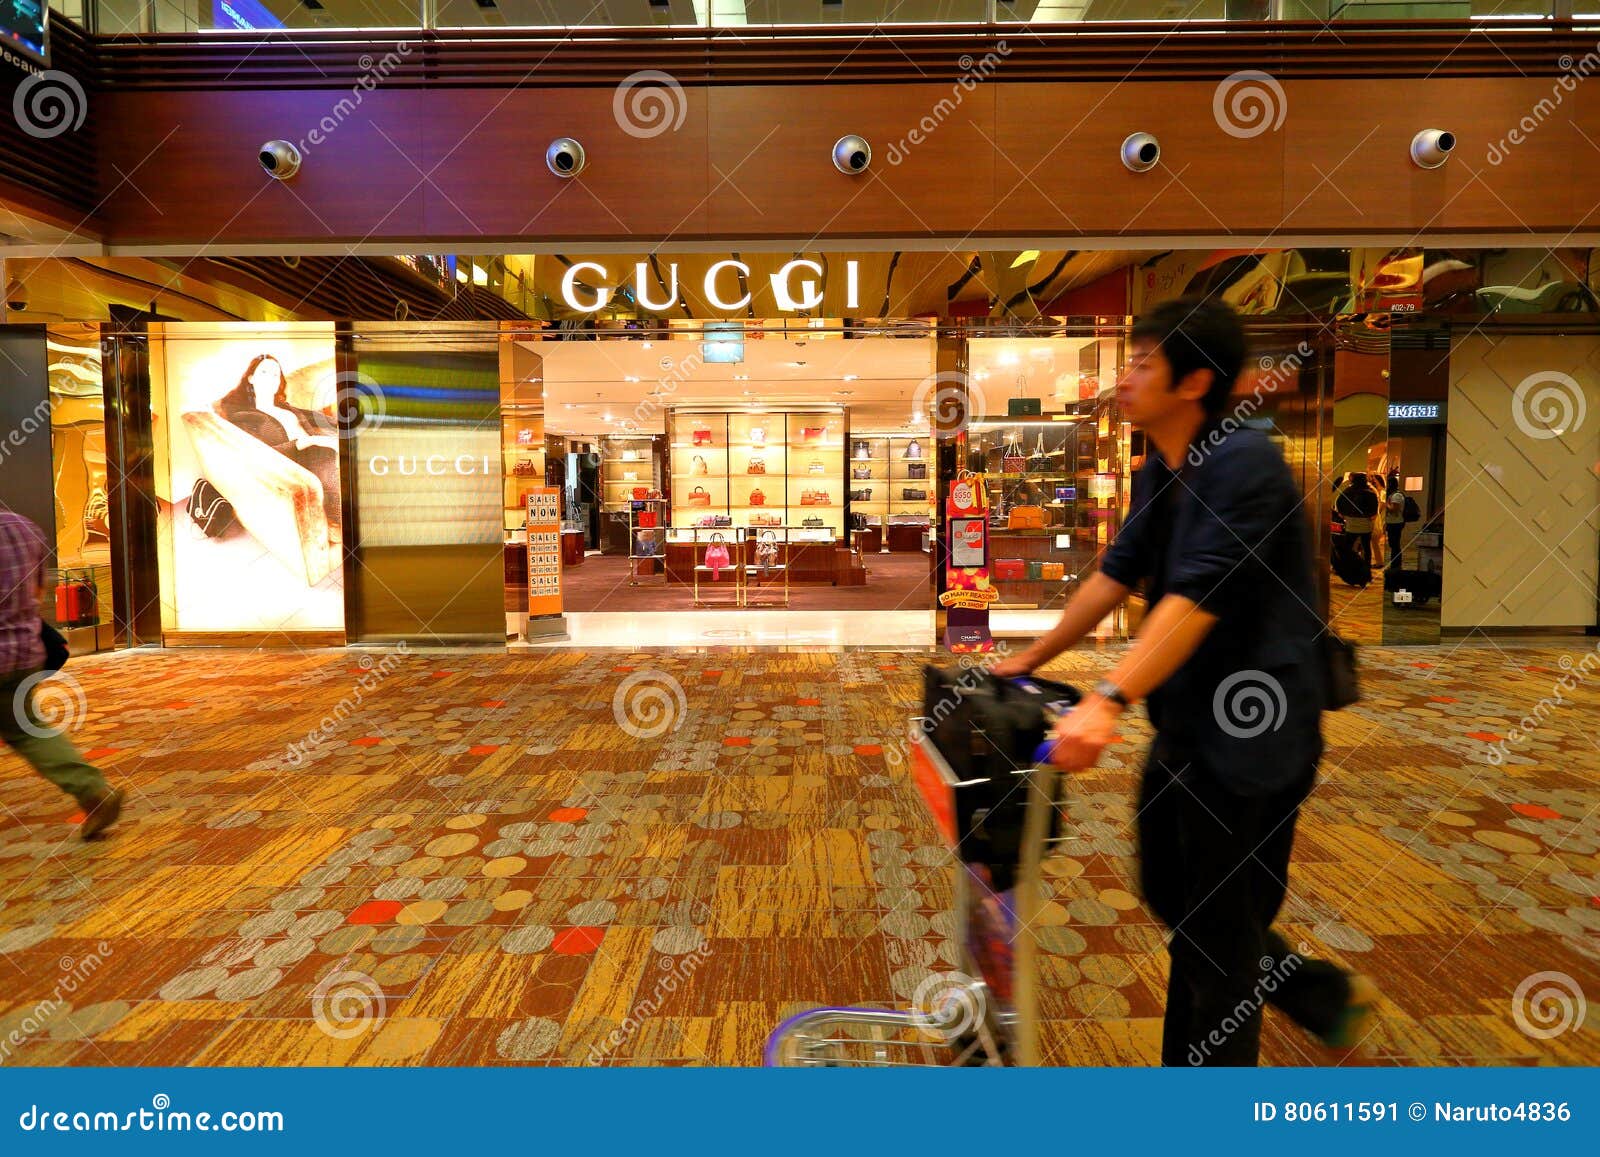 Singapore: Changi Airport Gucci Editorial Photo - Image of commercial, informartion: 80611591